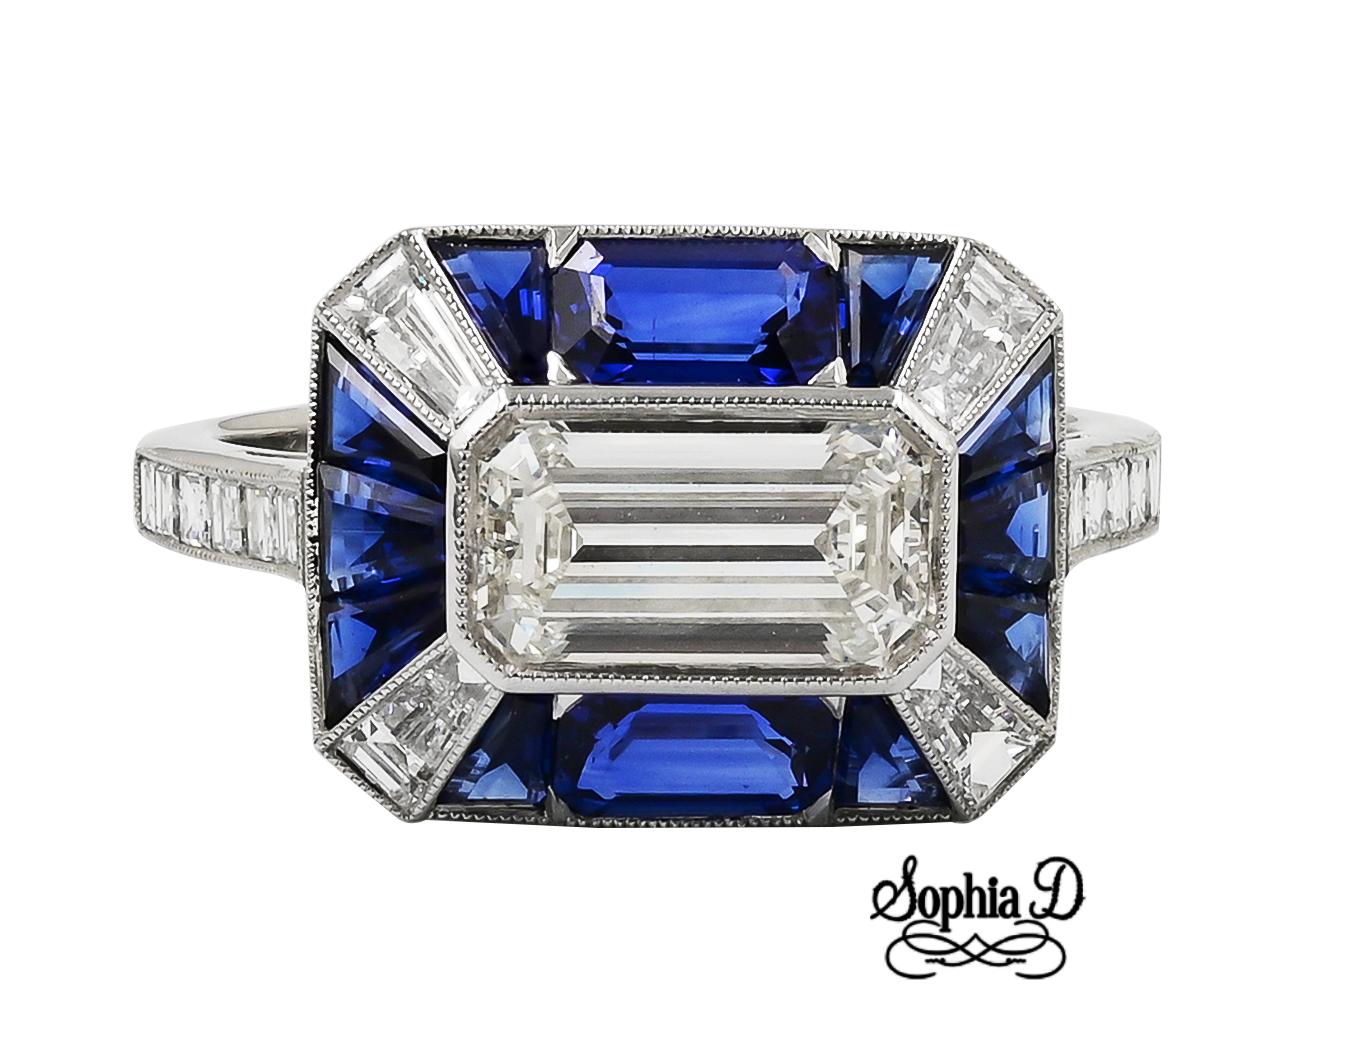 Sophia D. 1.30 Carat Diamond Art Deco Style Platinum Ring  In New Condition For Sale In New York, NY